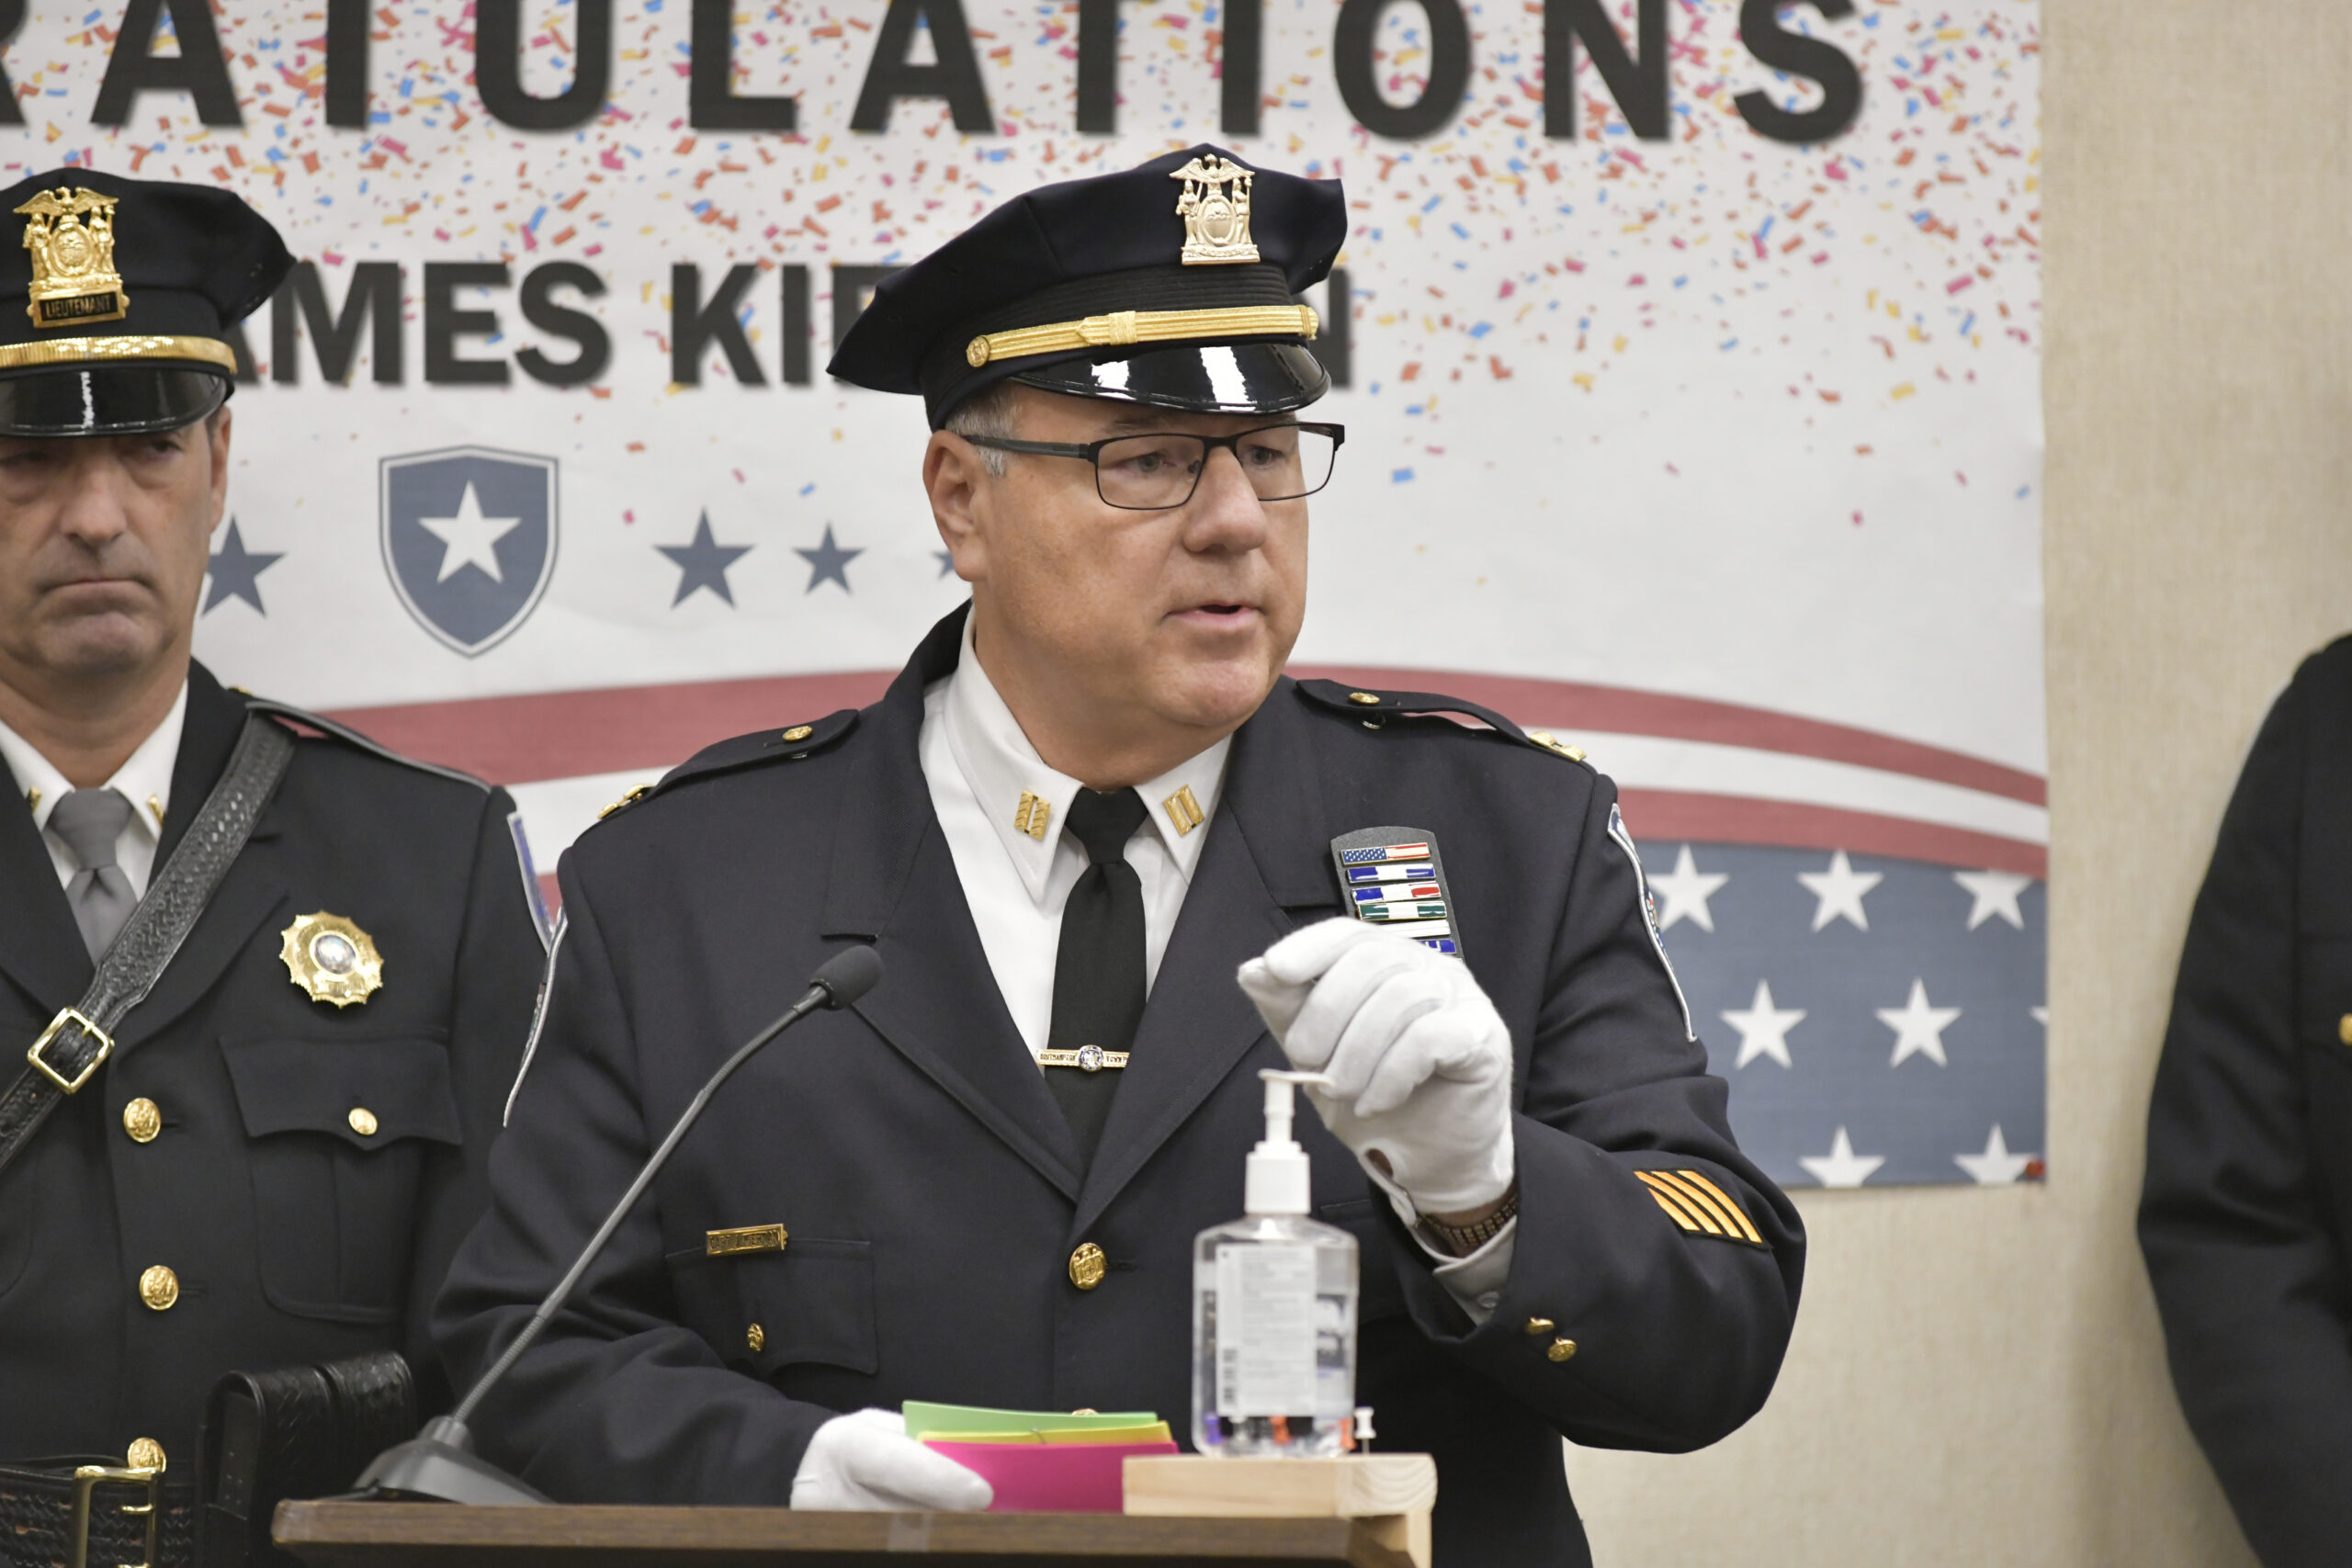 Newly sworn in Southampton Town Police Chief James Kiernan addresses the crowd at Town Hall on December 8.  DANA SHAW